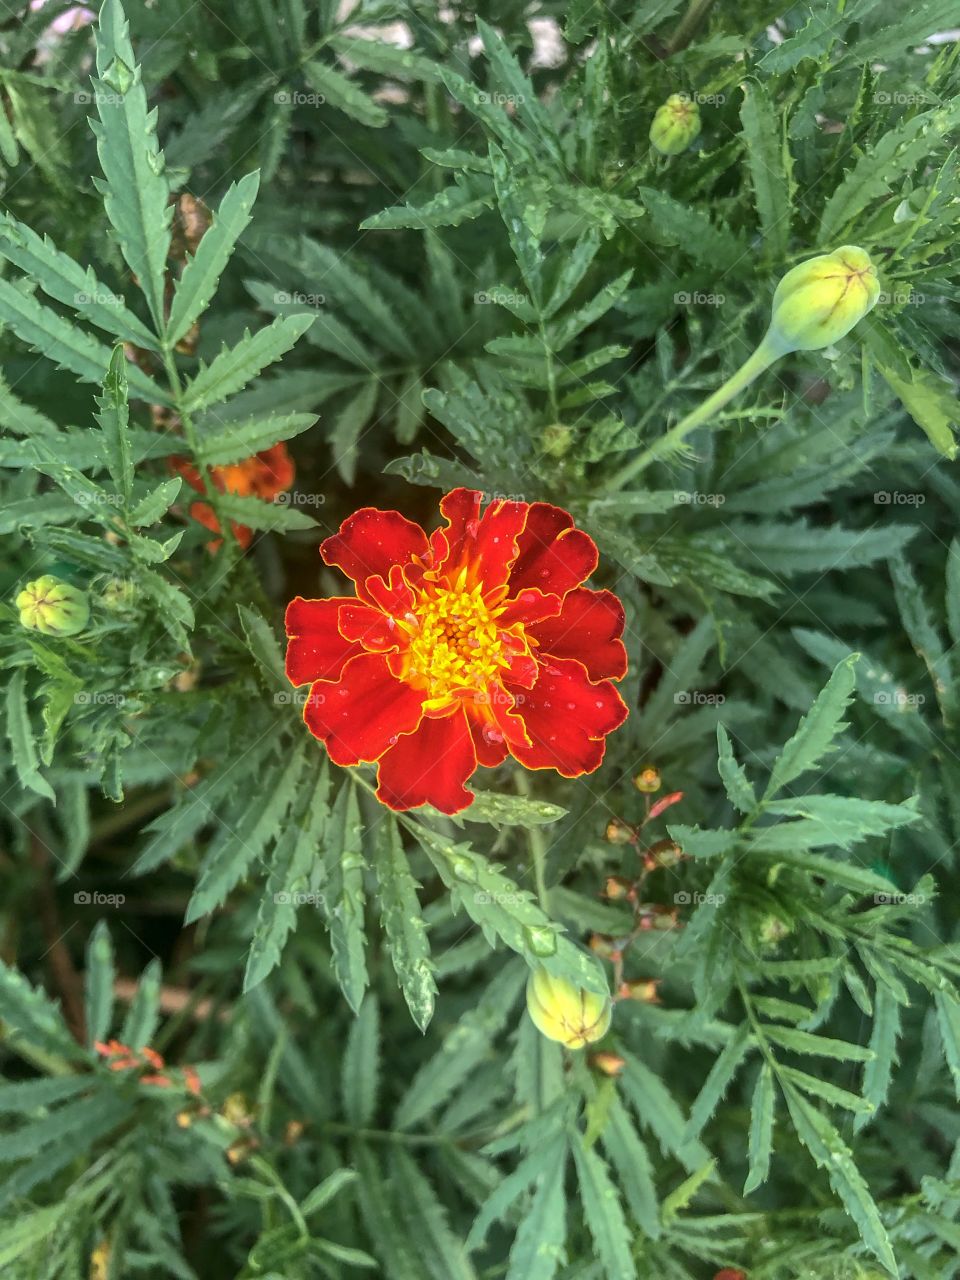 Tagetes erecta is a plant belonging to the Asteraceae family, native to Mexico and Guatemala.